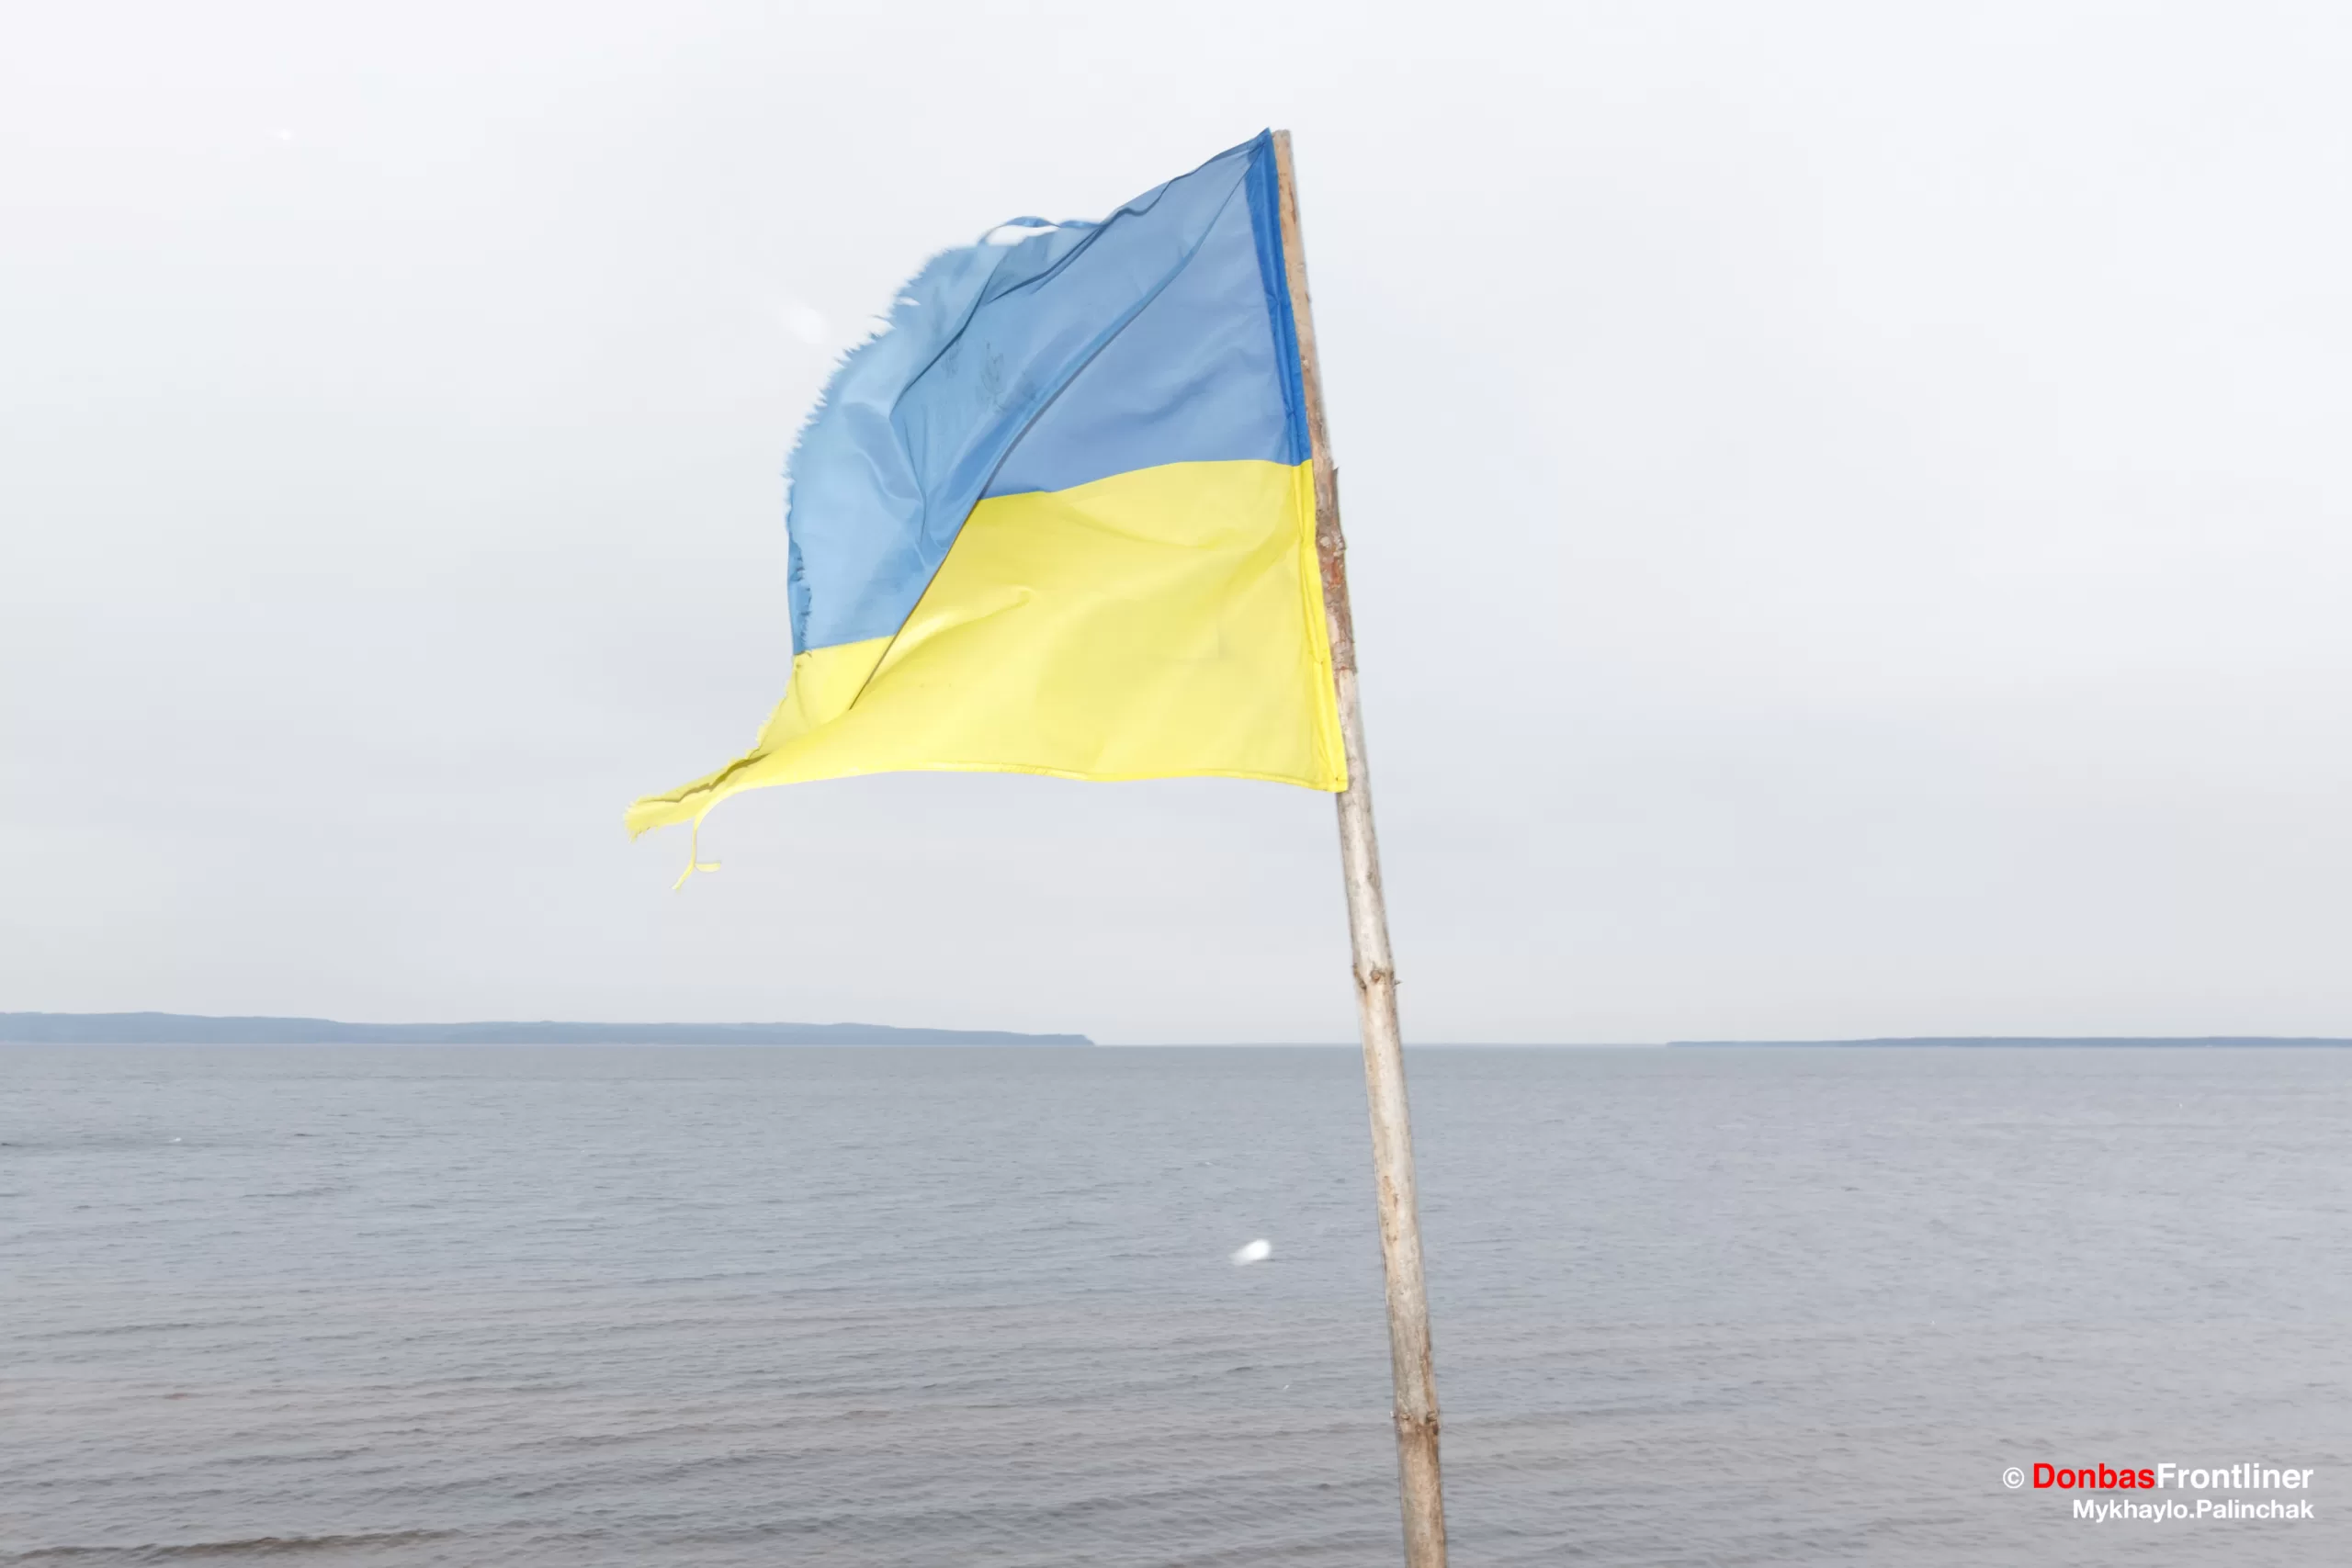 With the flag of Ukraine flying high, he emphasizes the significance of his "Fortress of Freedom" as a cocoon, a shell to heal a wounded soul amidst indifference and noise.